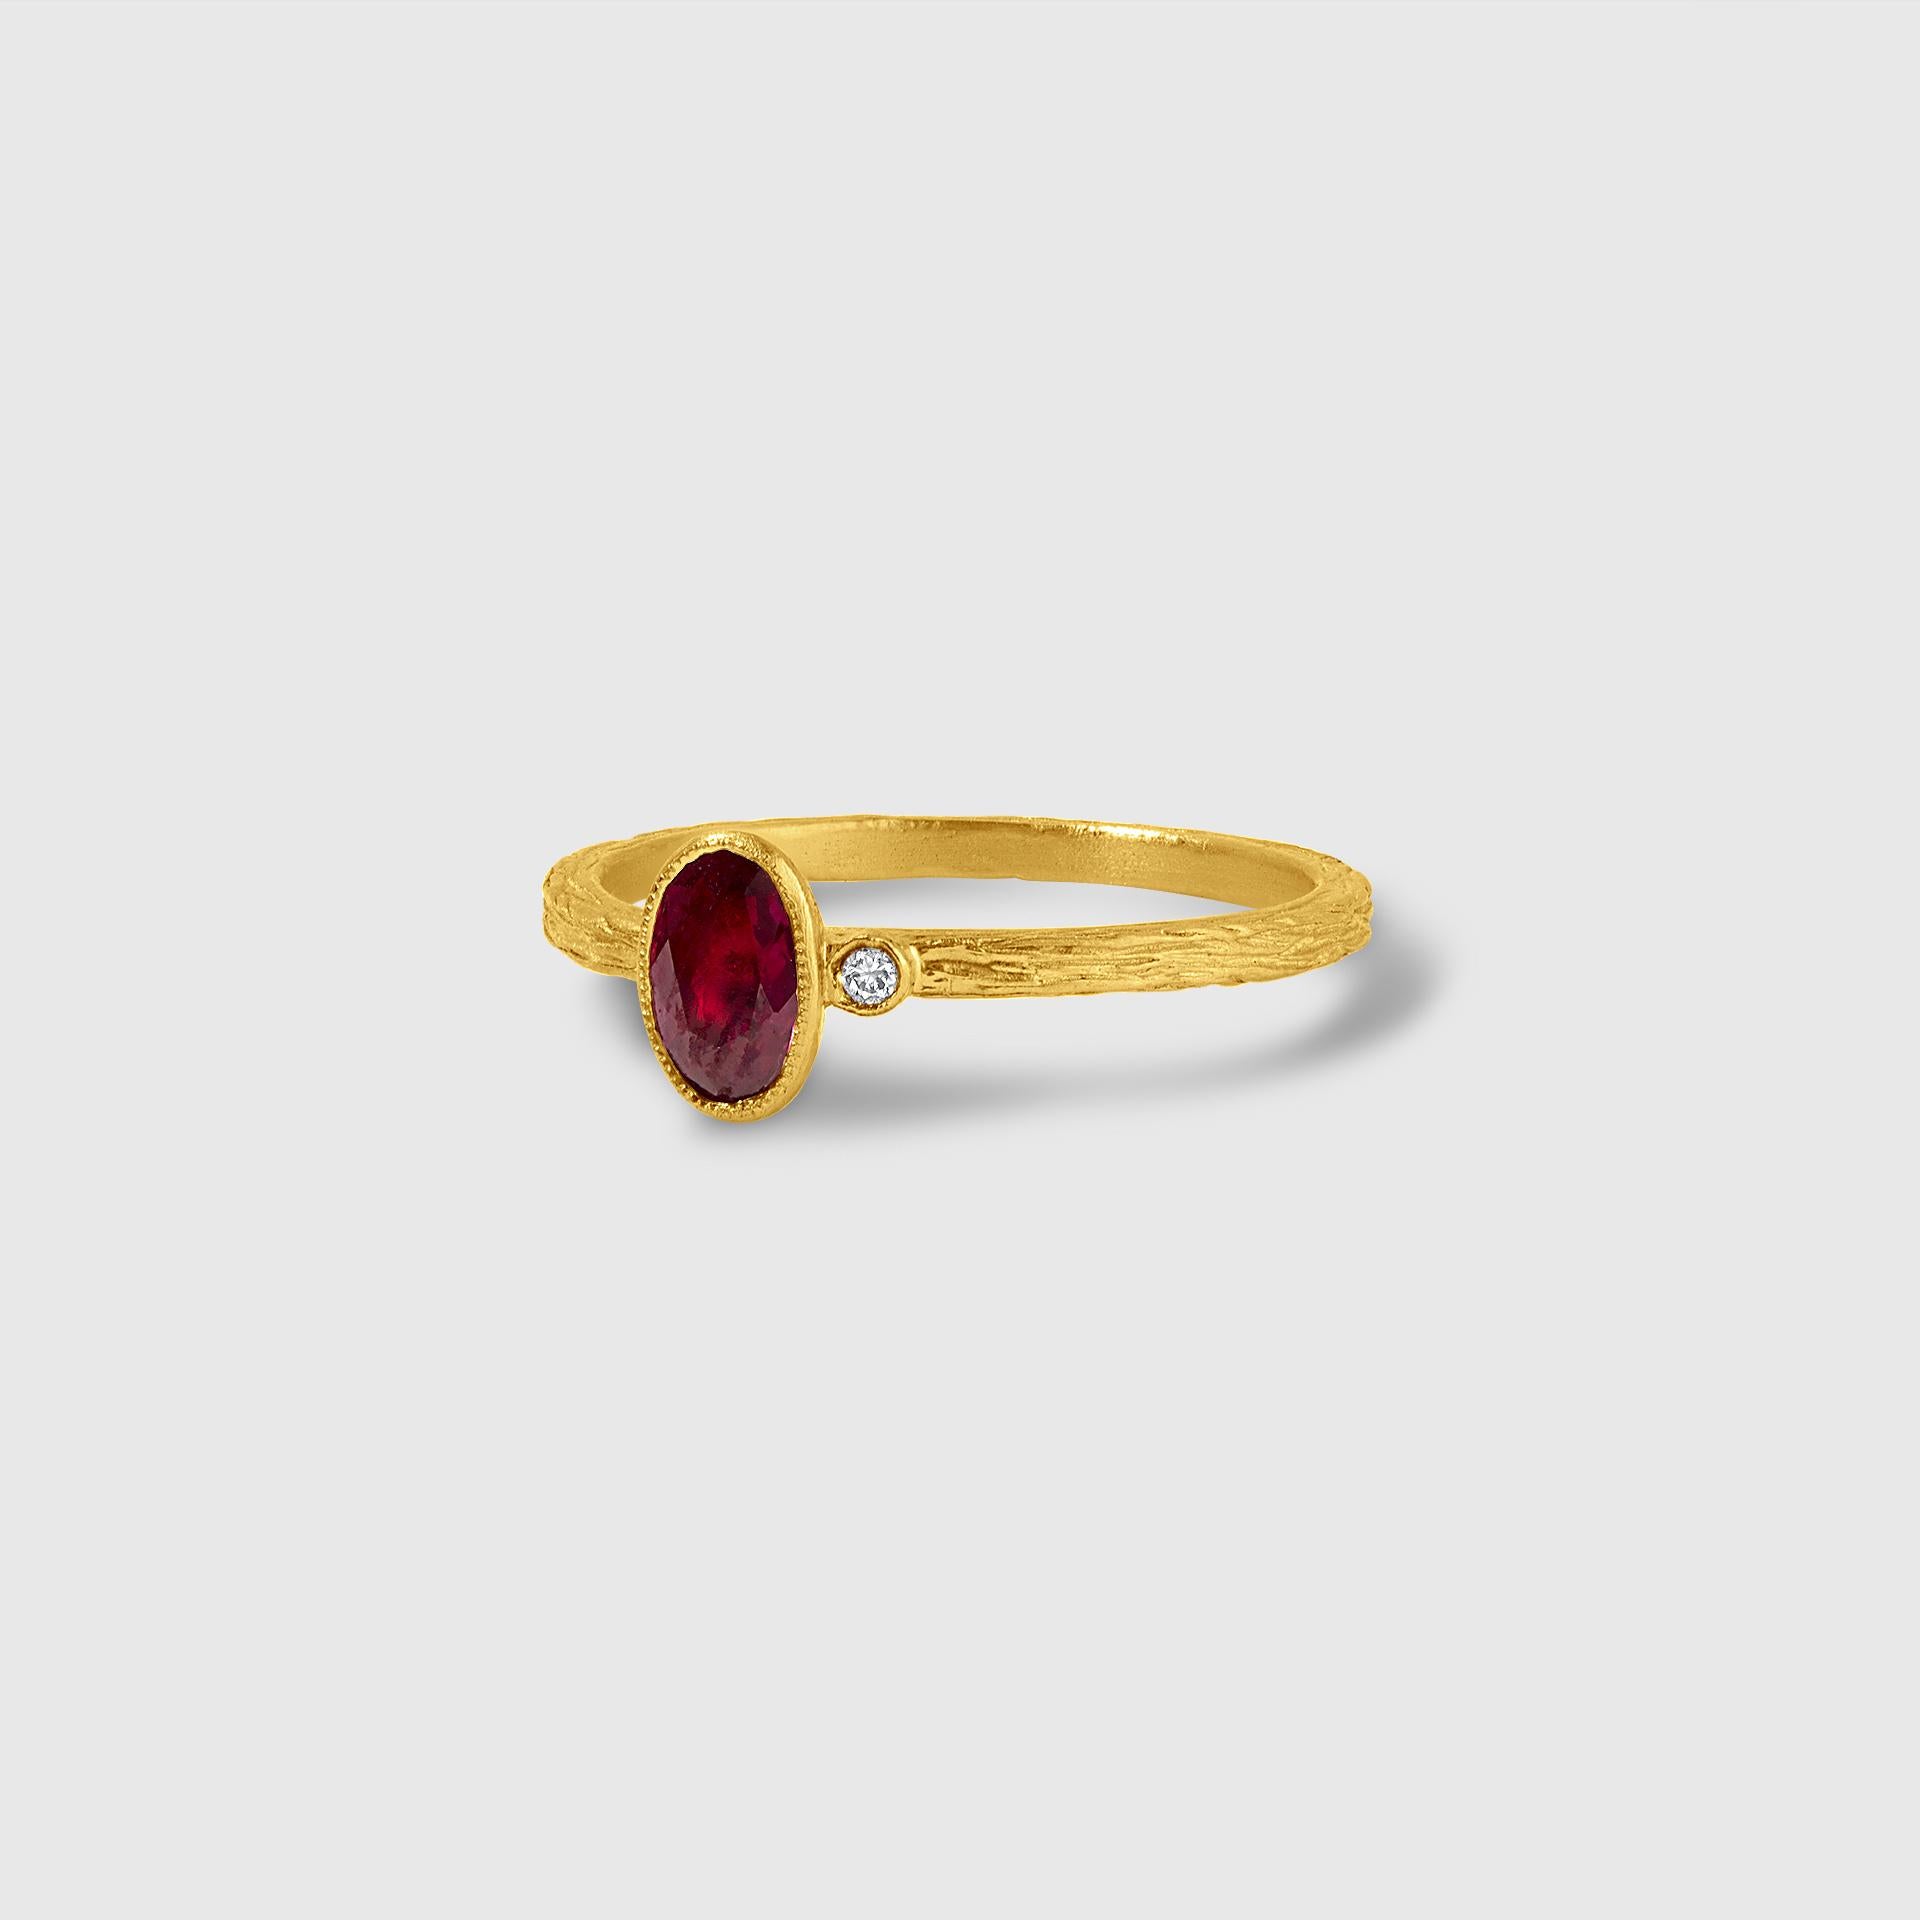 24kt Solid Gold Ring with Dark Red Single Ruby Stone by Prehistoric Works of Istanbul, Turkey. Ruby- 0.35ct. Diamond - 0.02cts. Band is slightly textured and makes as a beautiful stacking ring with other bands in the gallery. Size 6 1/2 US